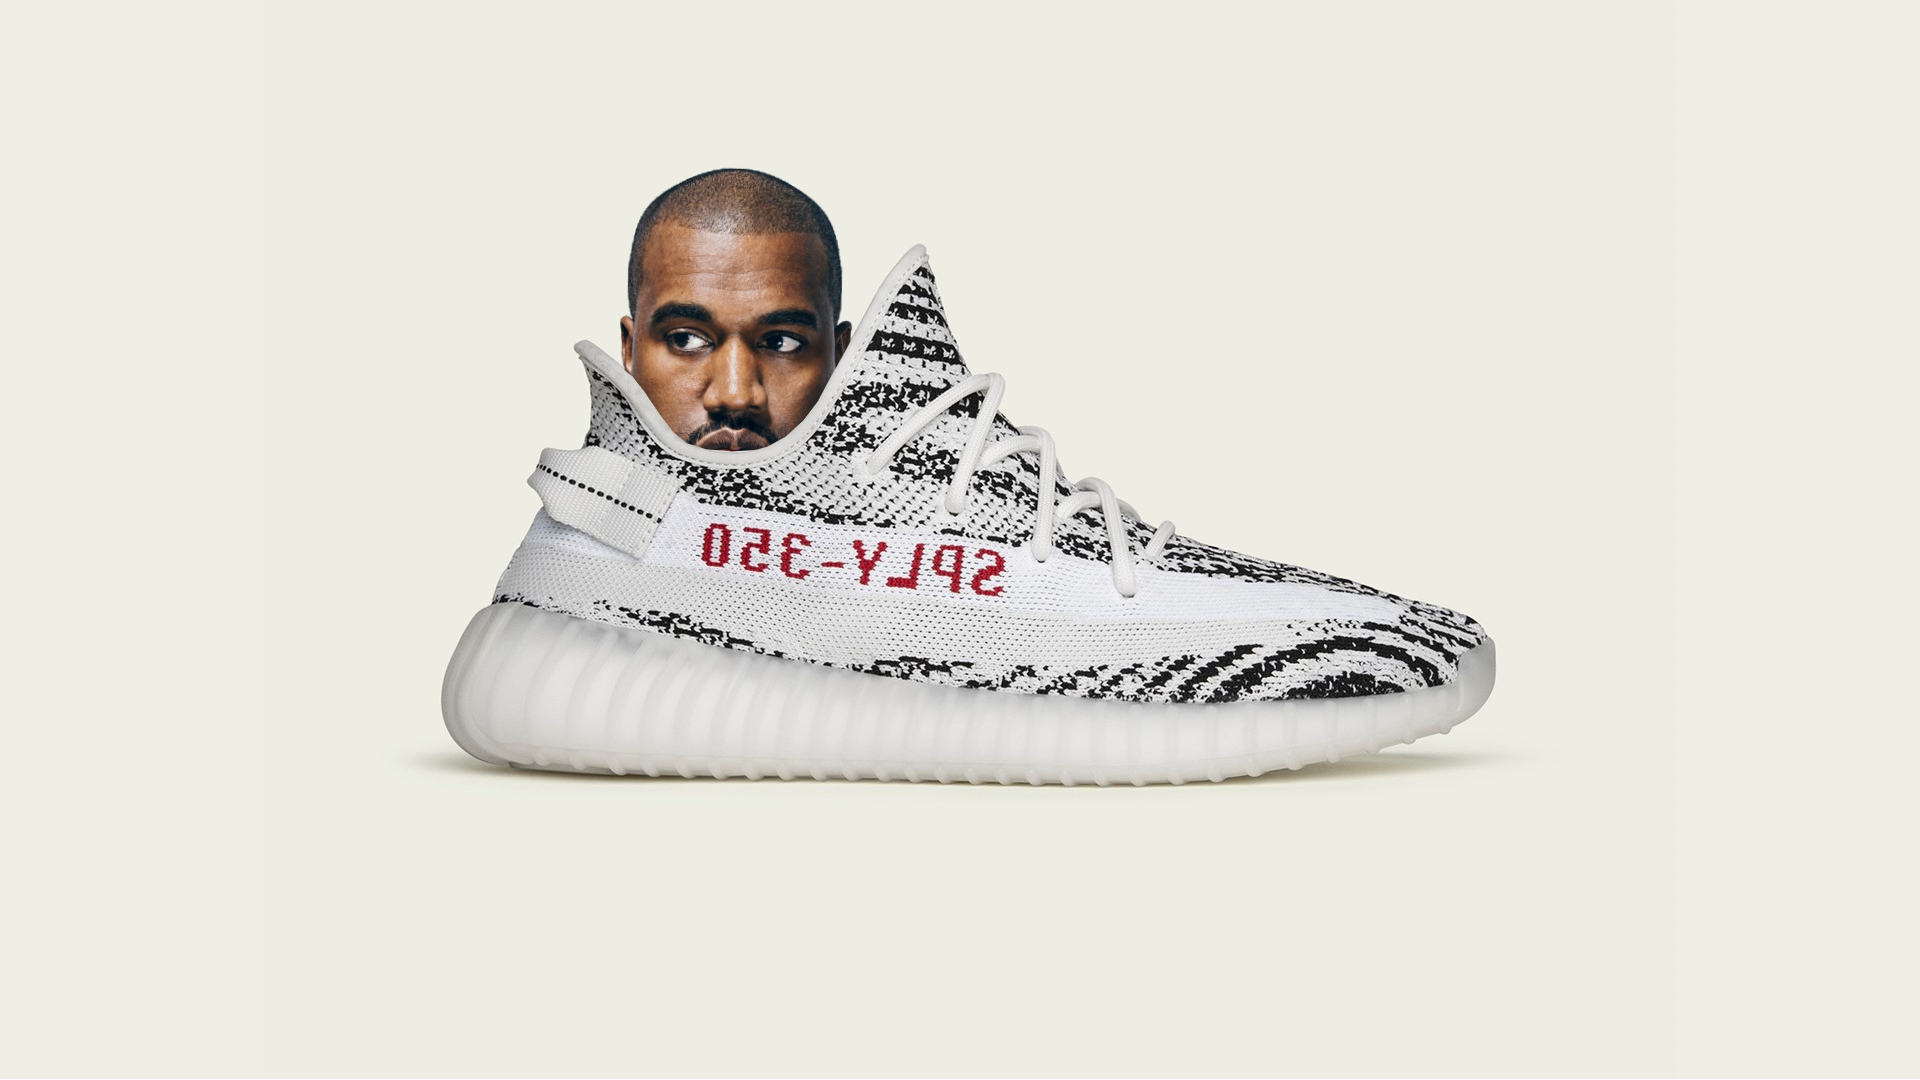 Yeezy stockpile: Adidas will sell Ye-designed shoes and donate